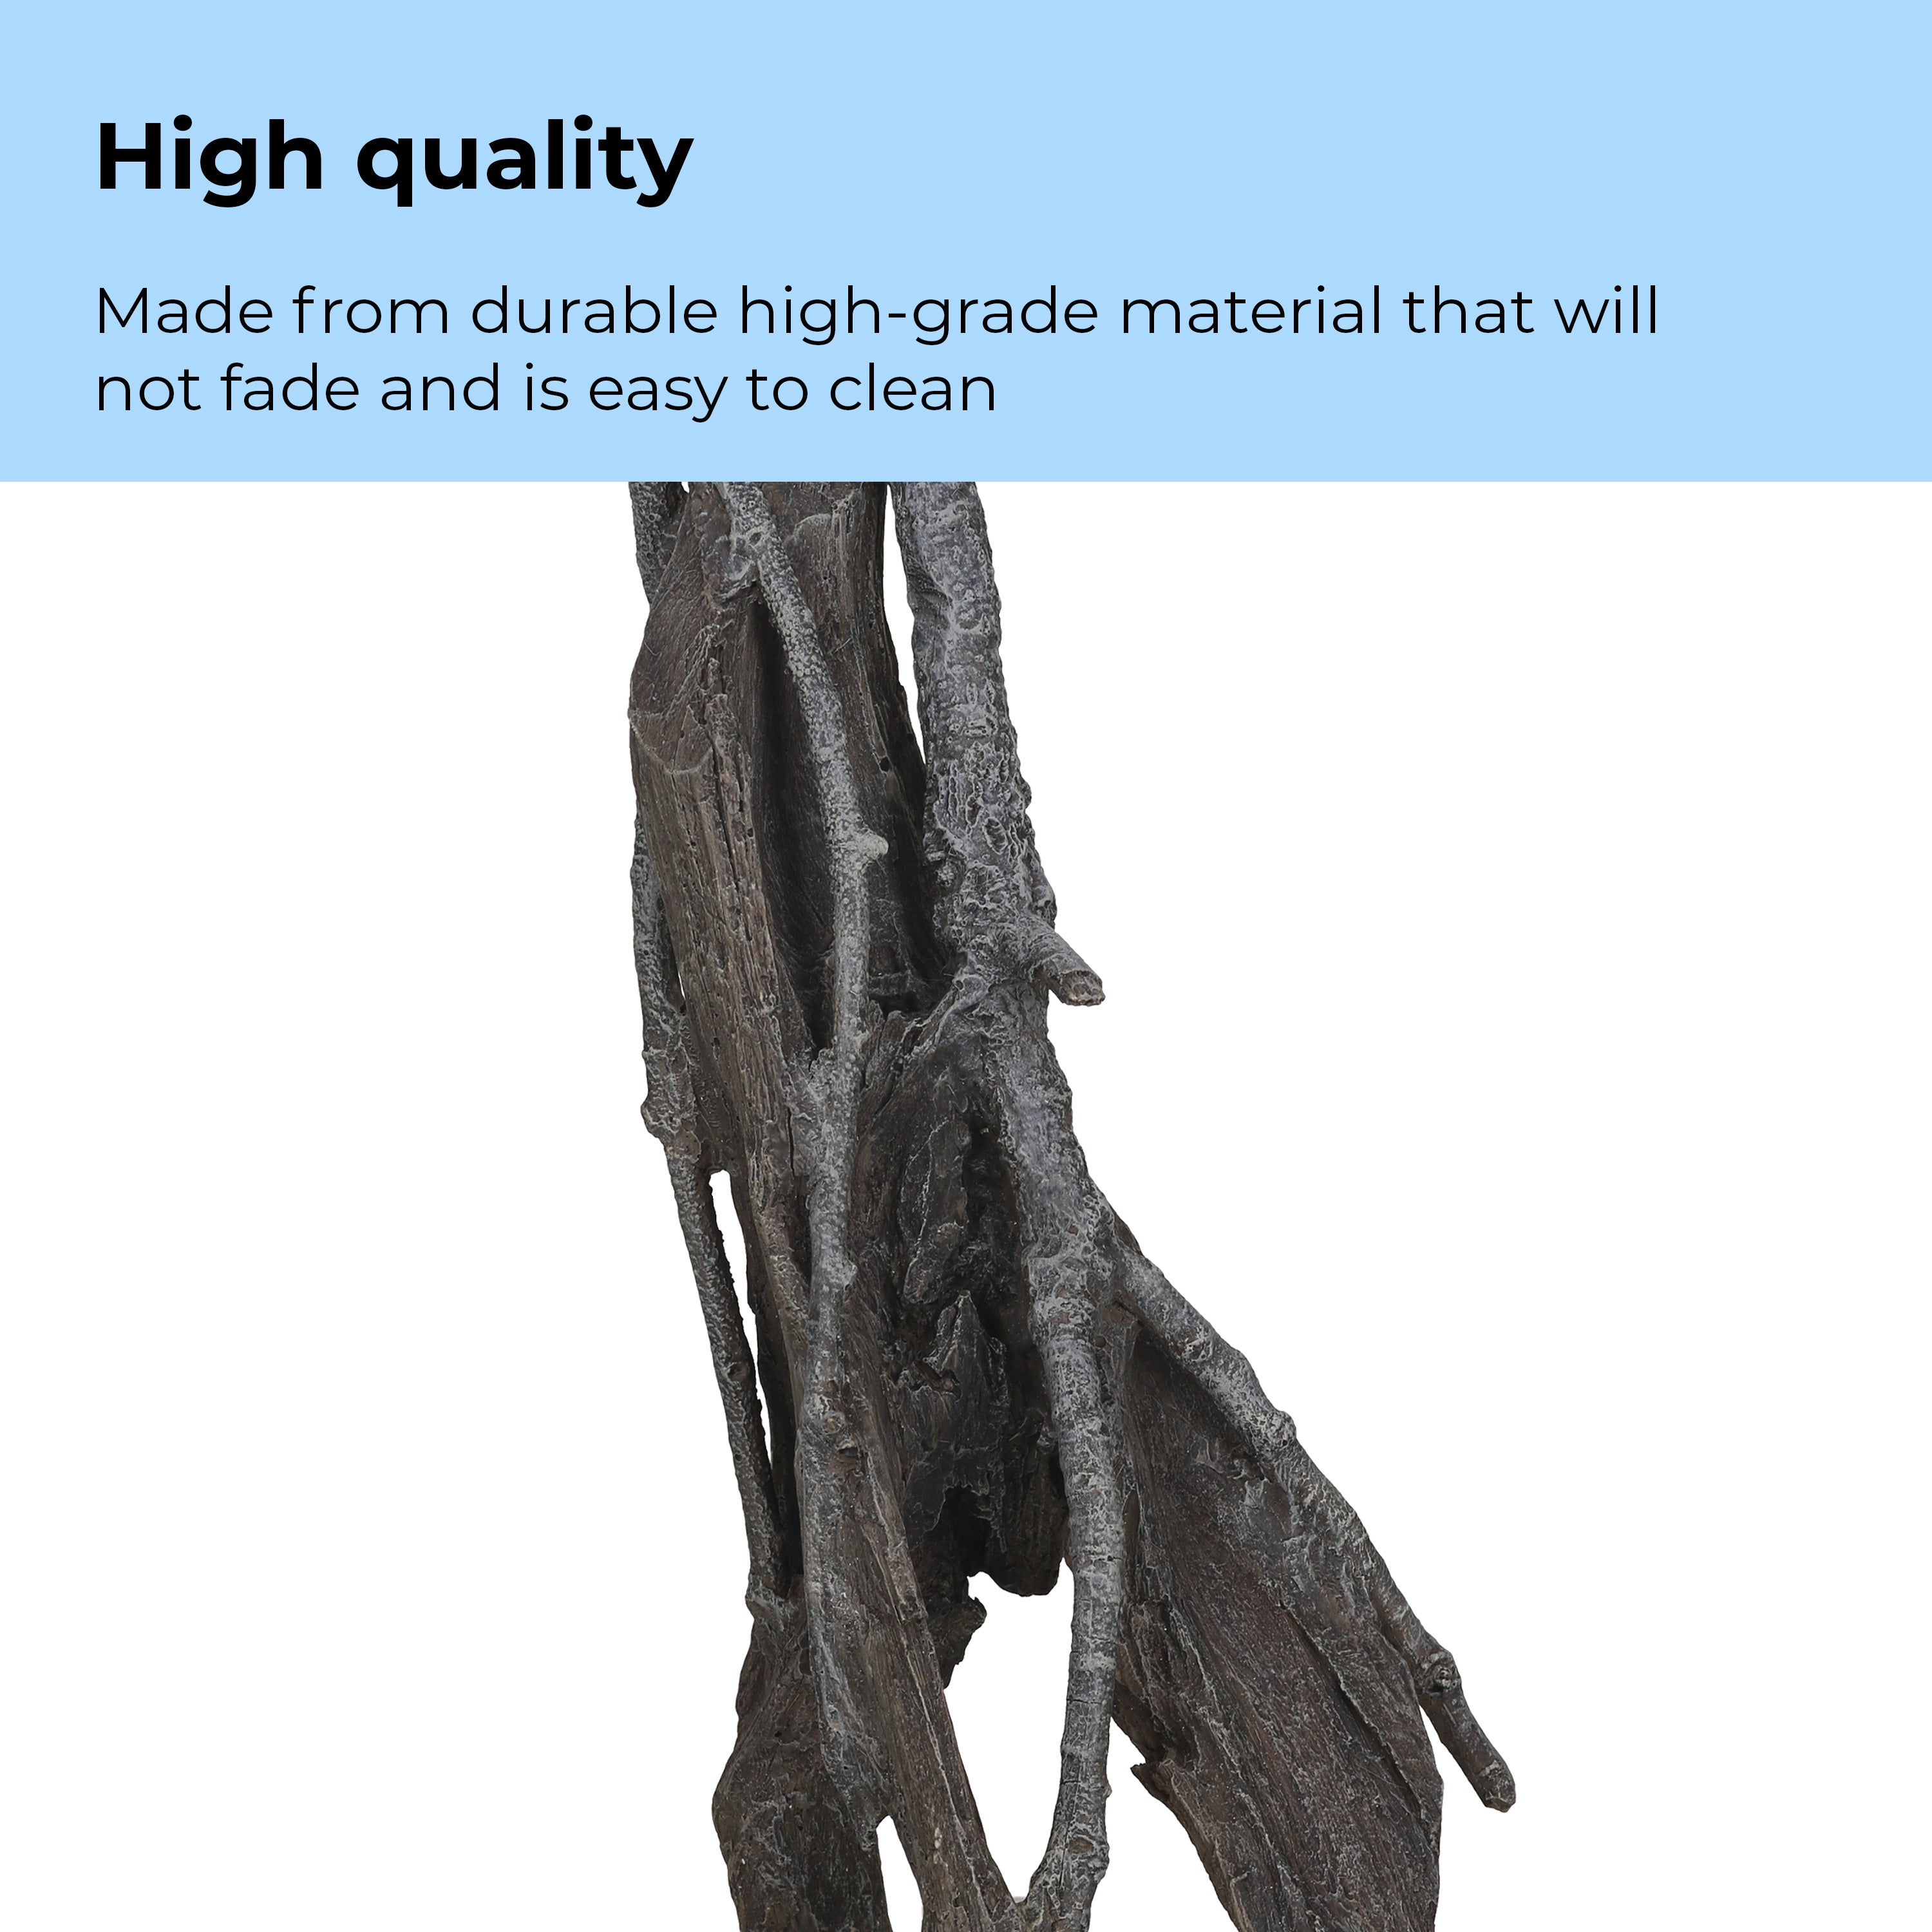 Large Amazonas Root Sculpture made from durable high-grade material